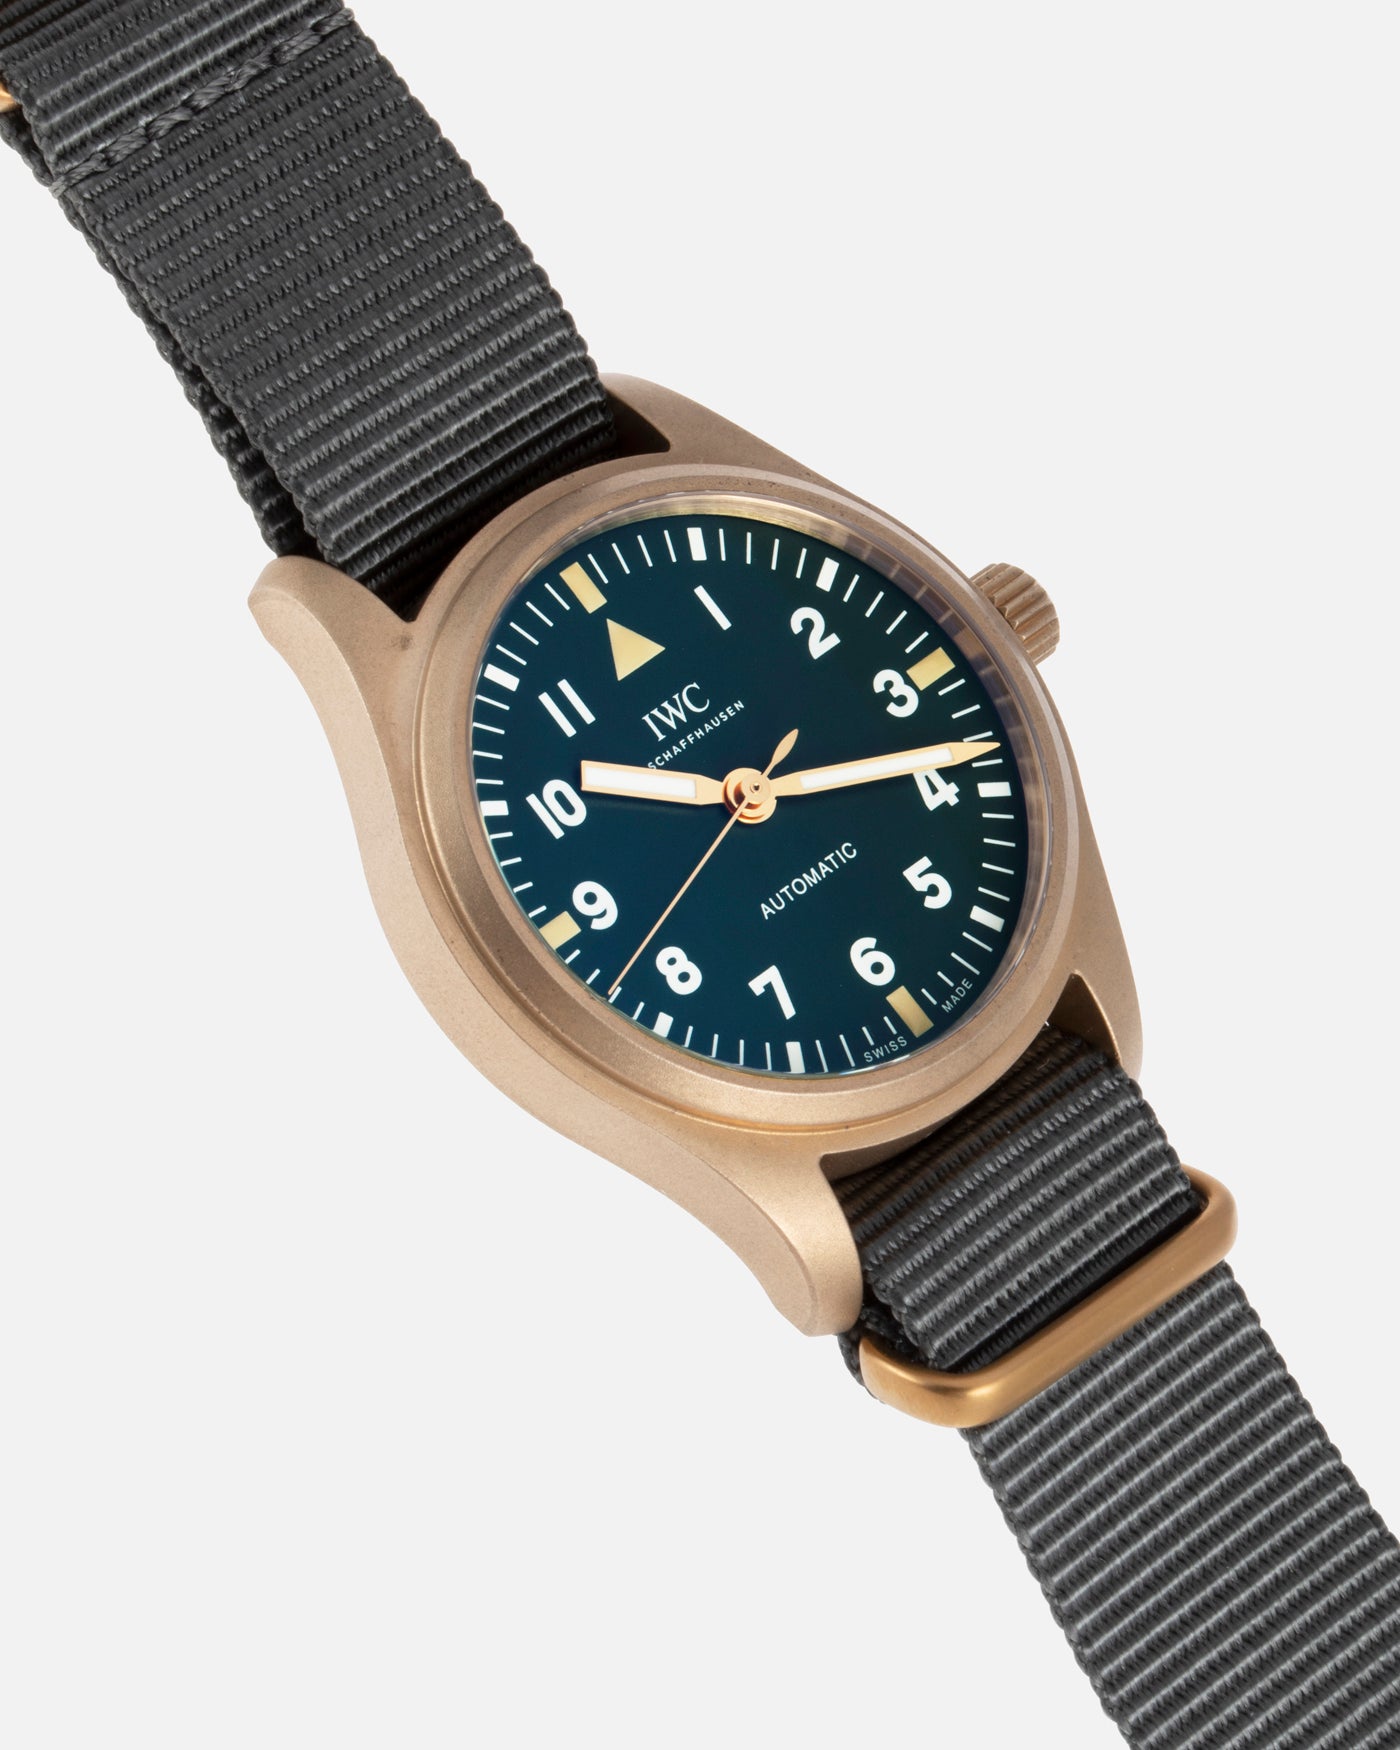 IWC Pilot for The Rake and Revolution